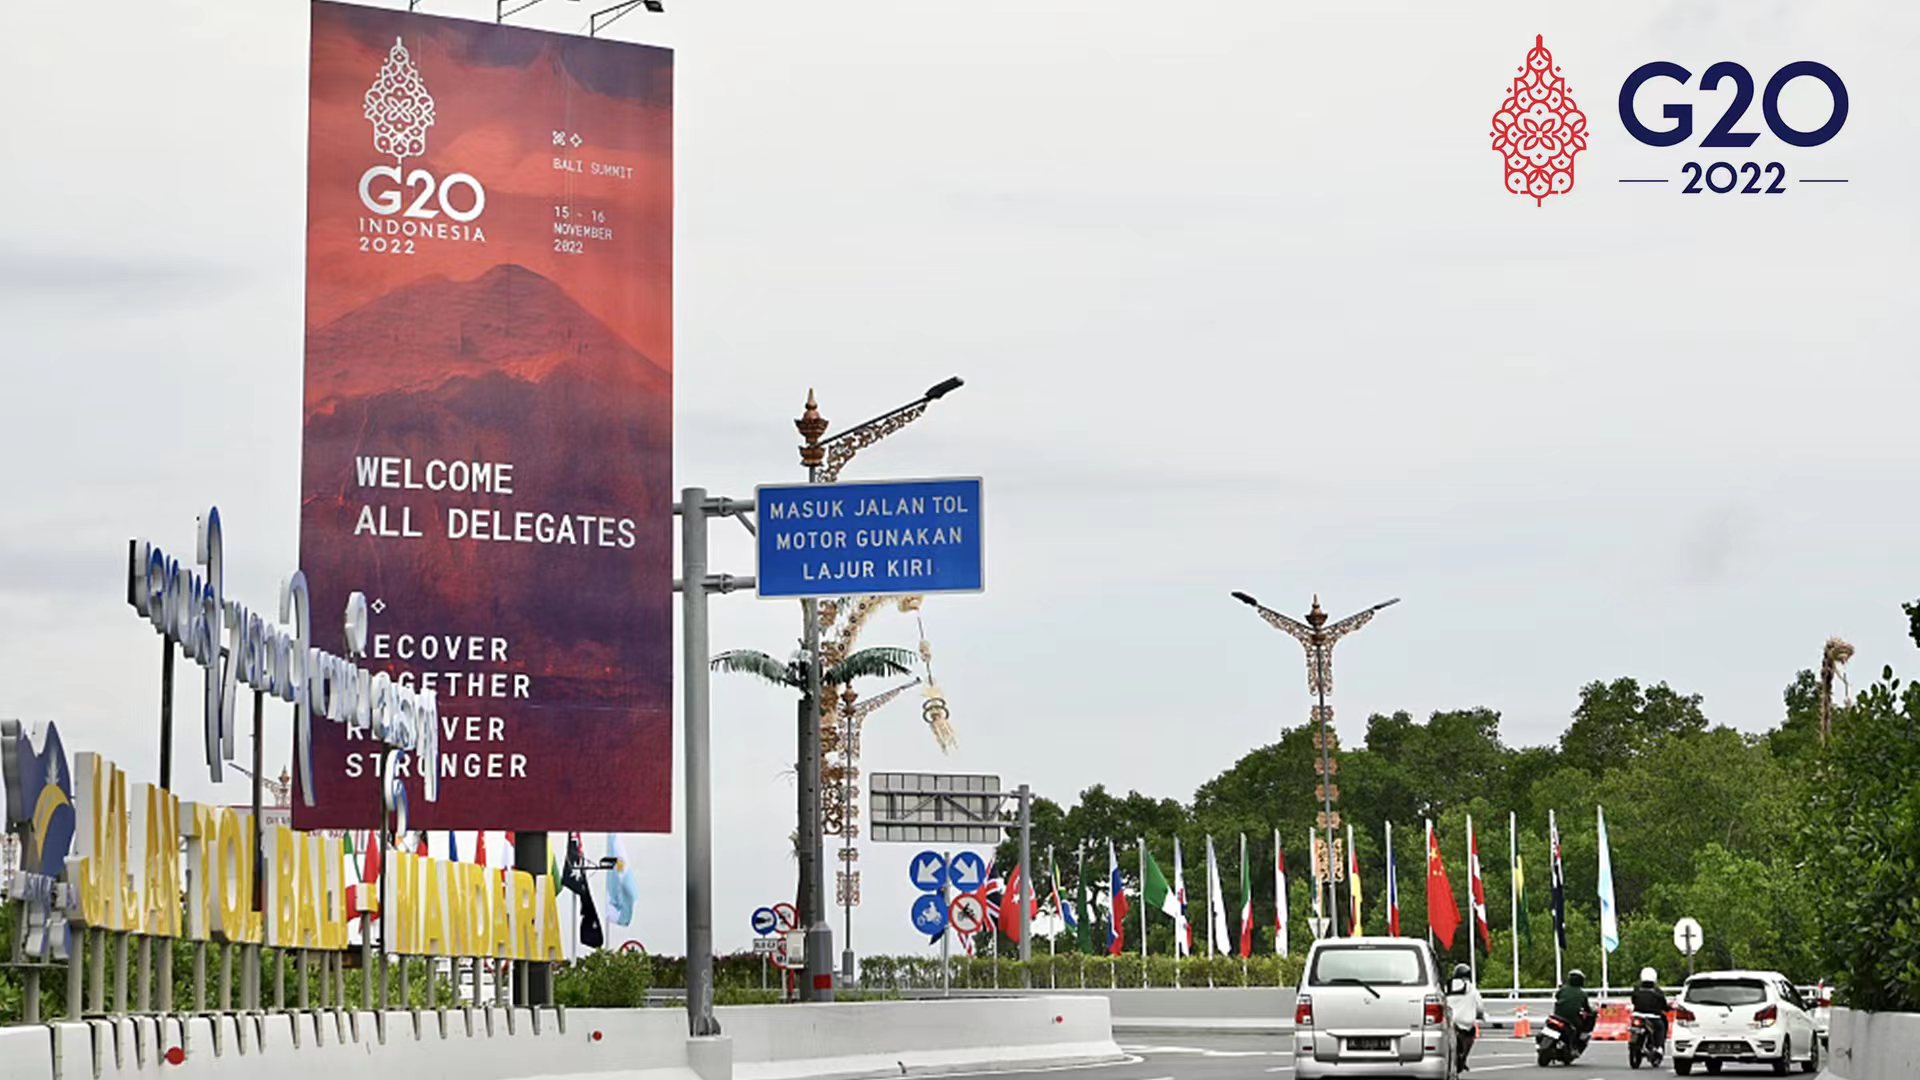 Live: Special coverage on closing of the G20 Summit in Bali